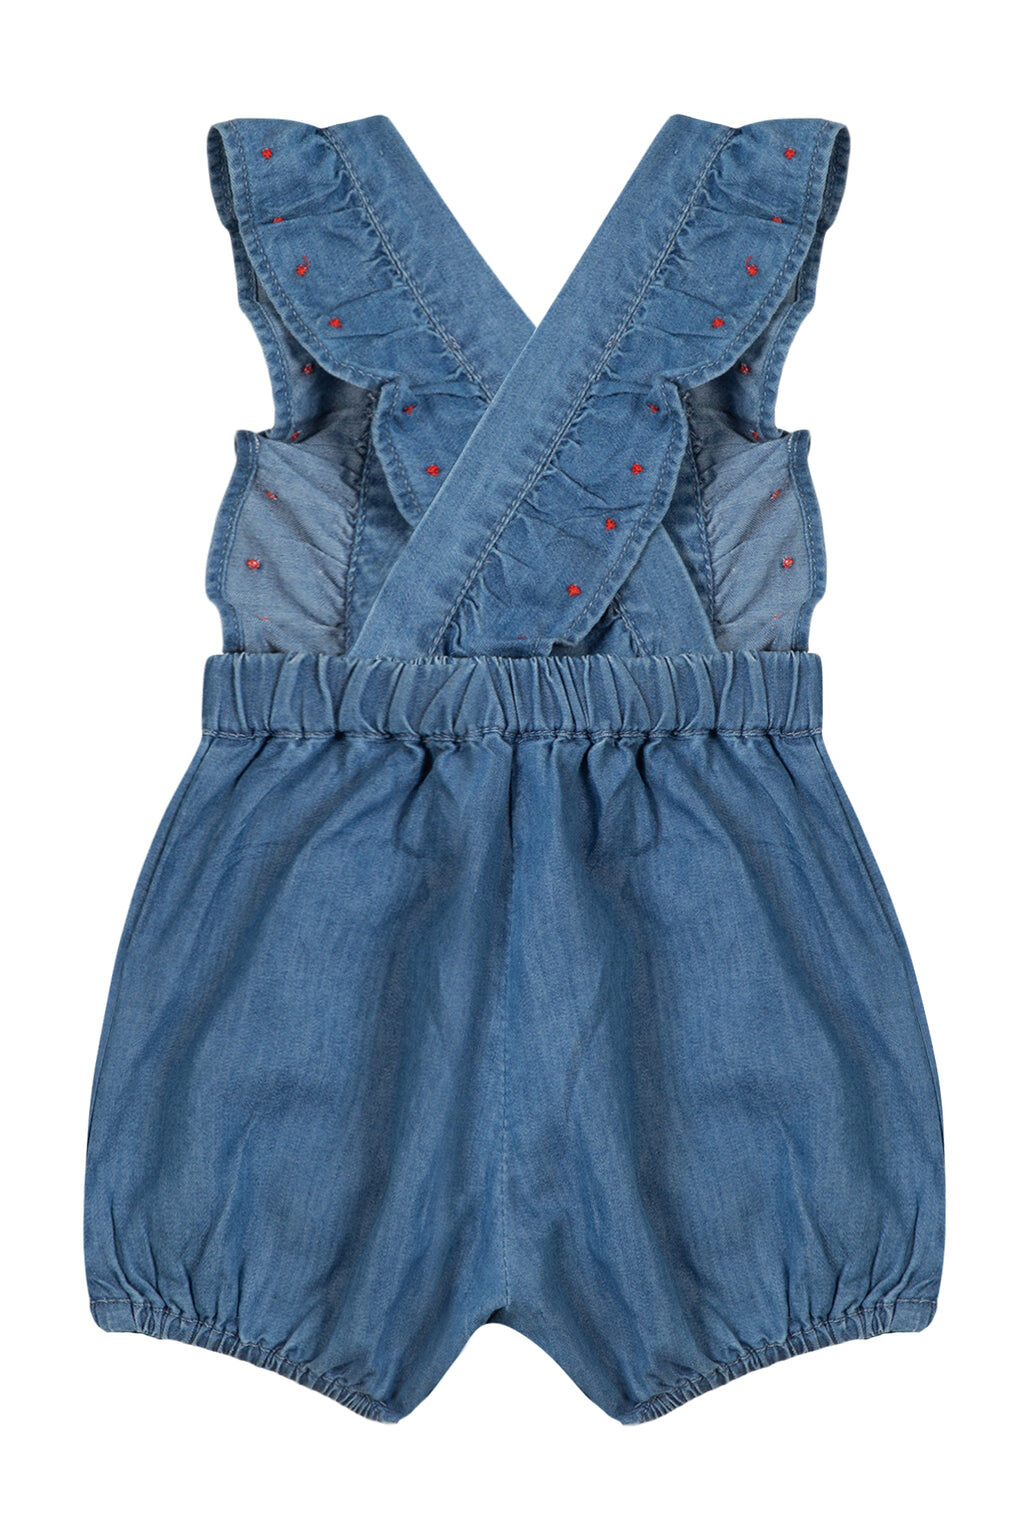 dungaree - Blue Floral Embroidery